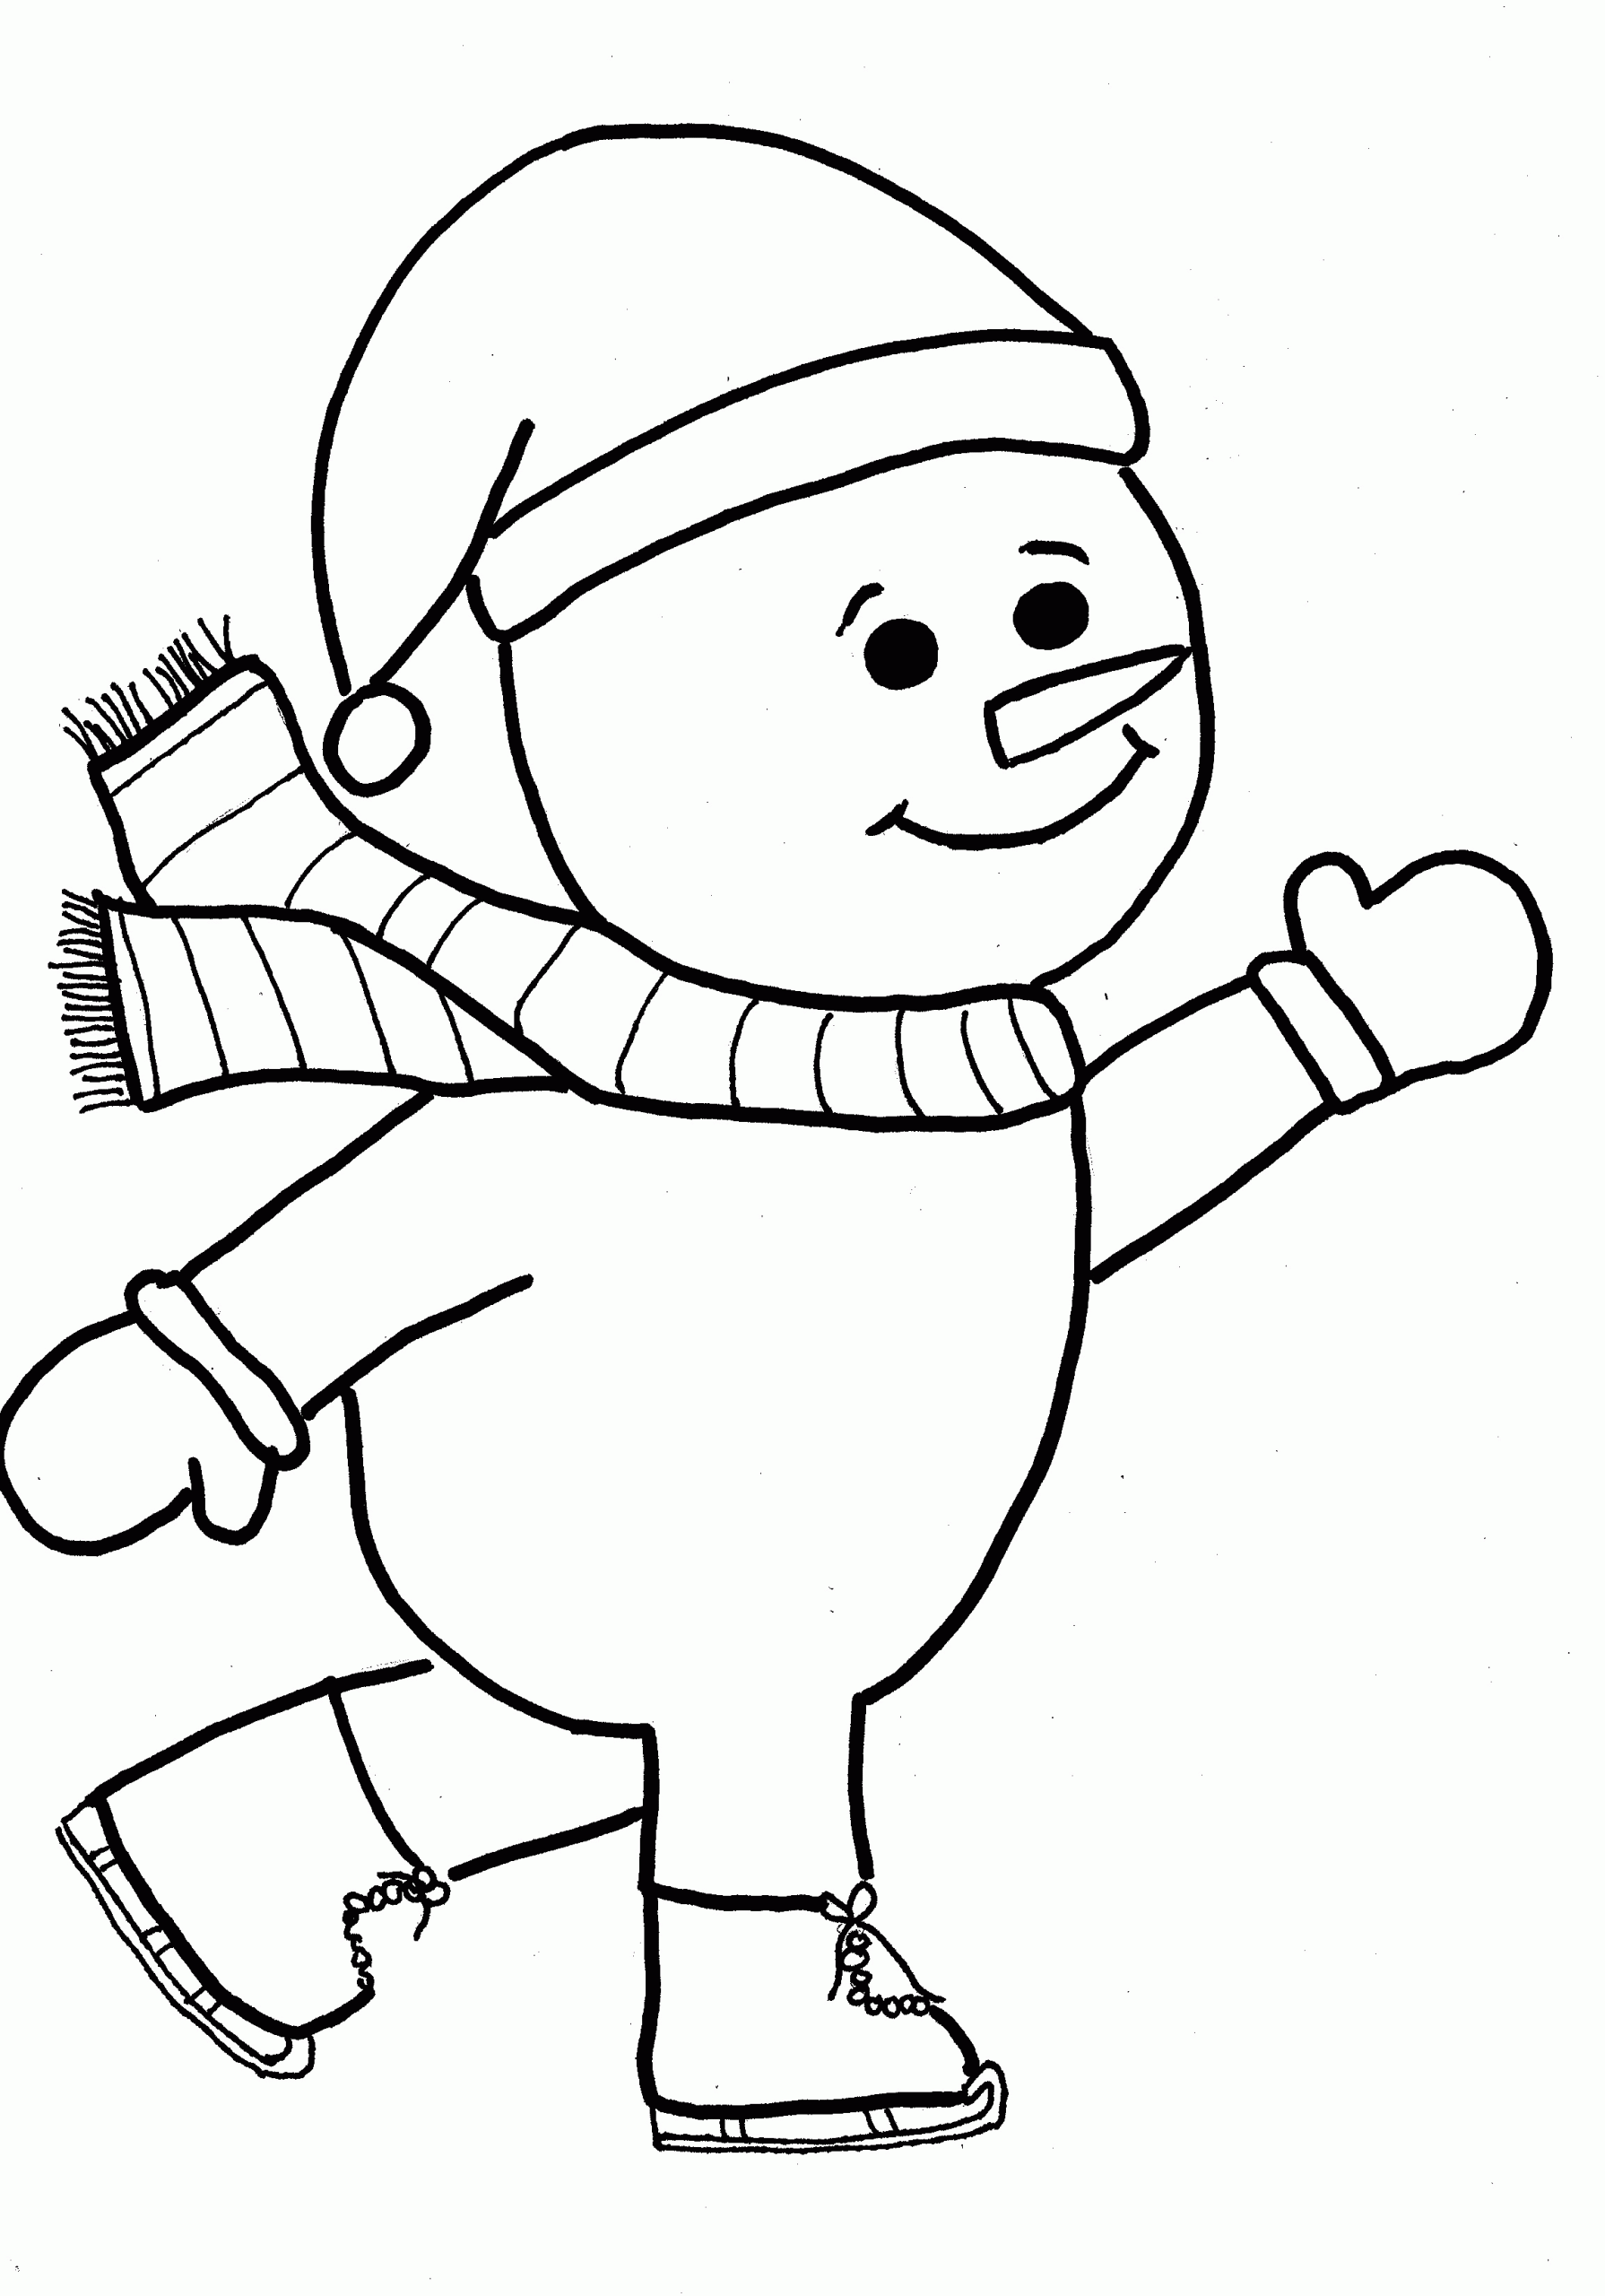 Snowman Coloring Pages Printable
 Free Printable Snowman Coloring Pages For Kids